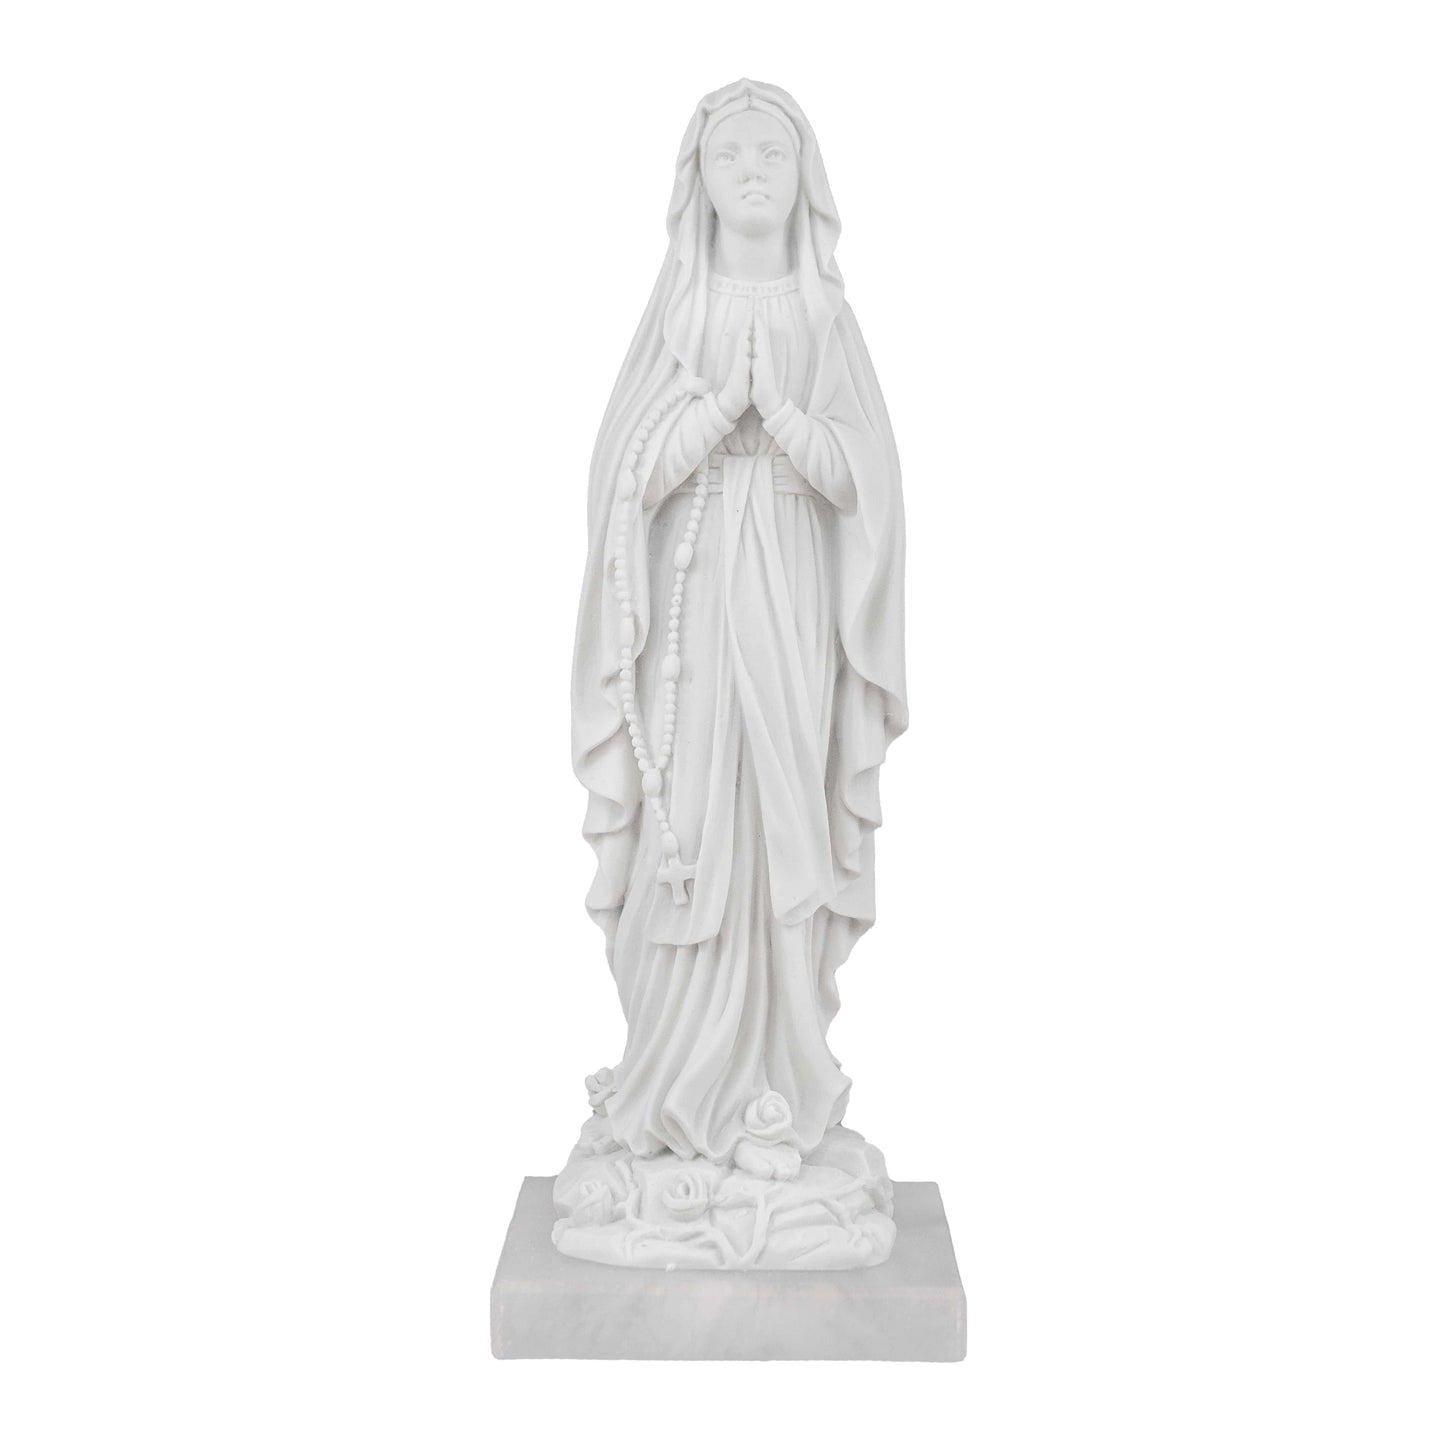 MONDO CATTOLICO Our Lady of Lourdes with Roses White Marble Dust